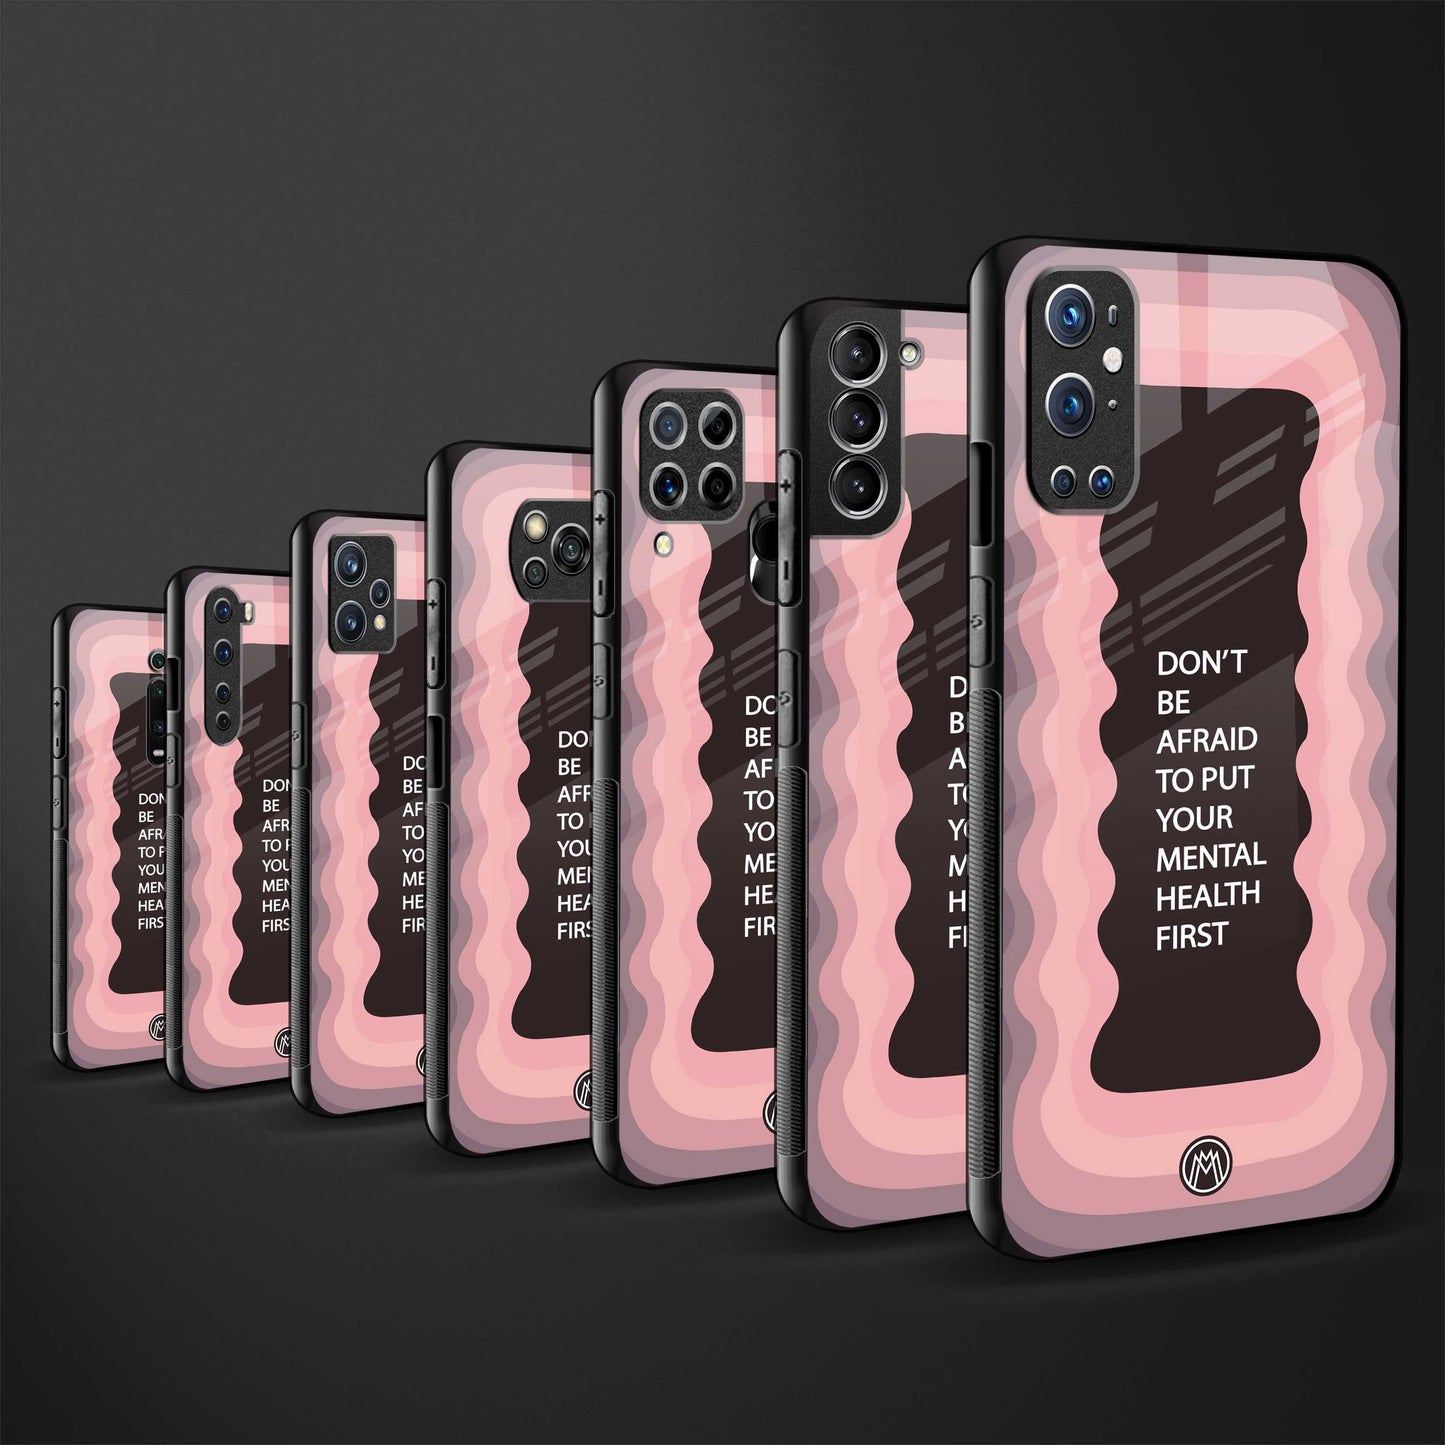 mental health first glass case for iphone xs max